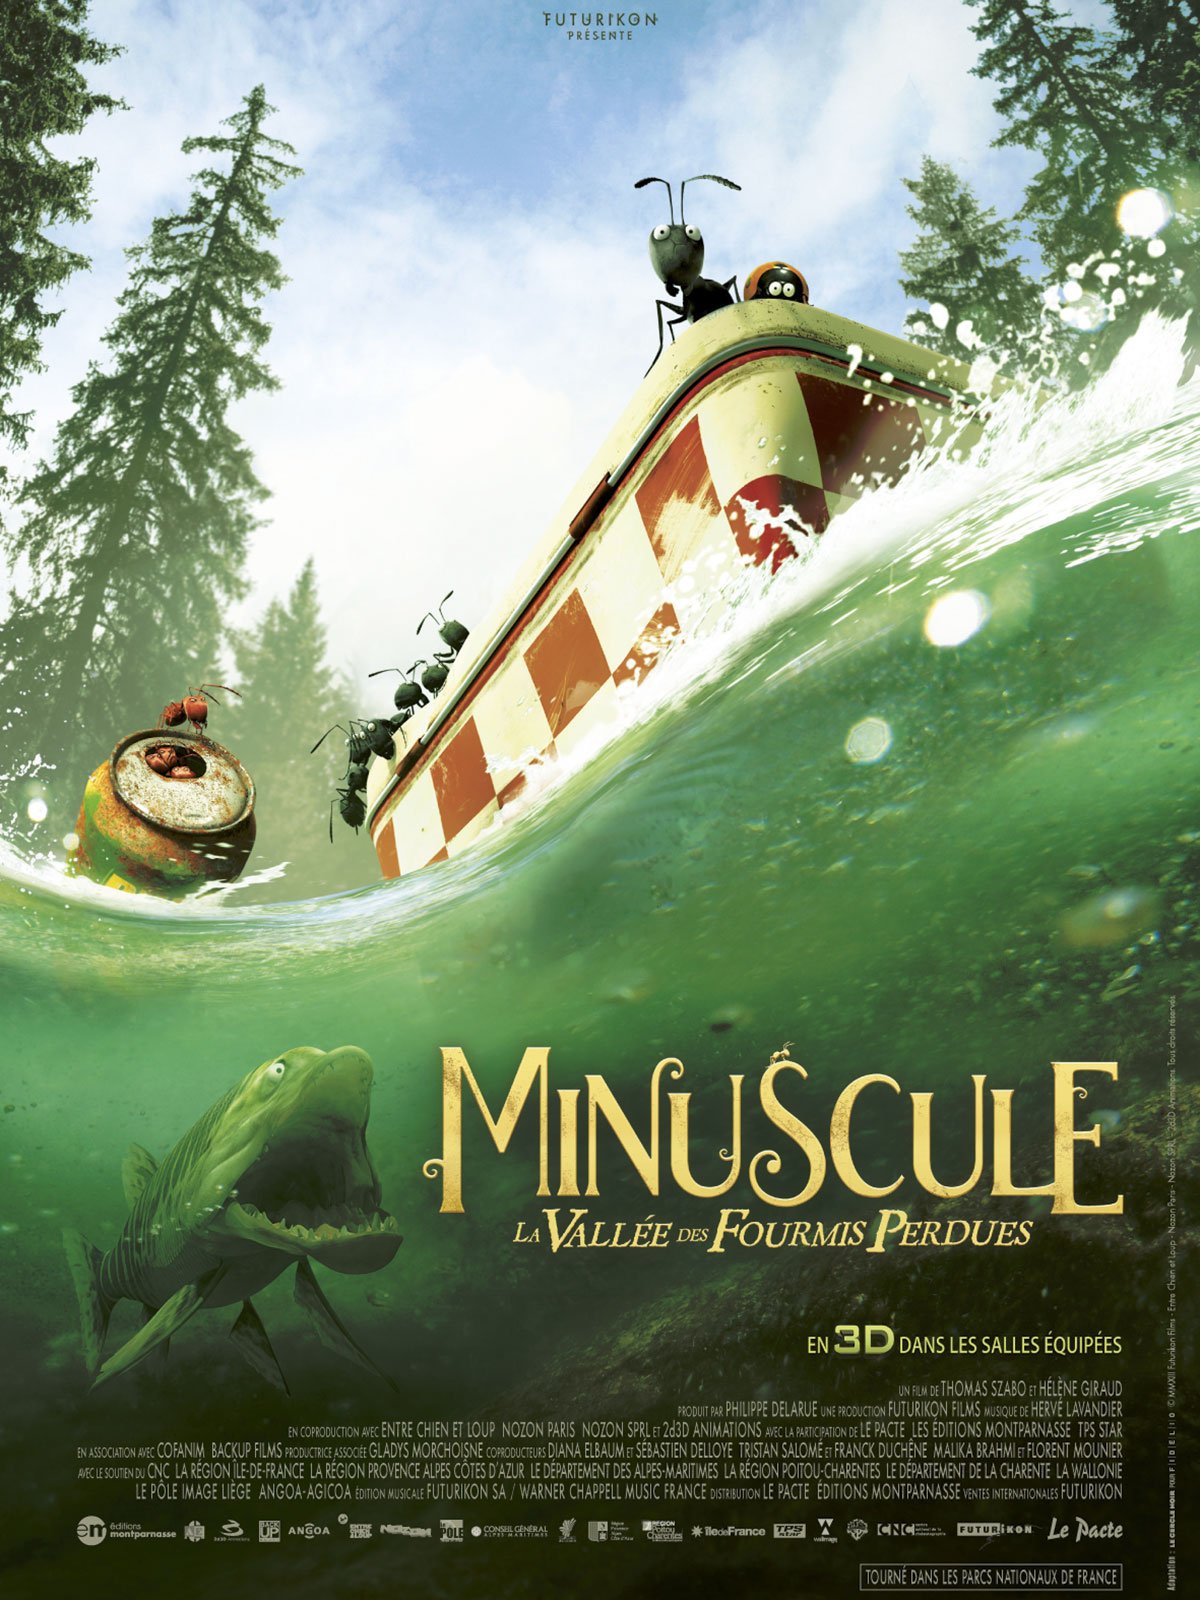 Poster of the movie Minuscule Valley of the Lost Ants